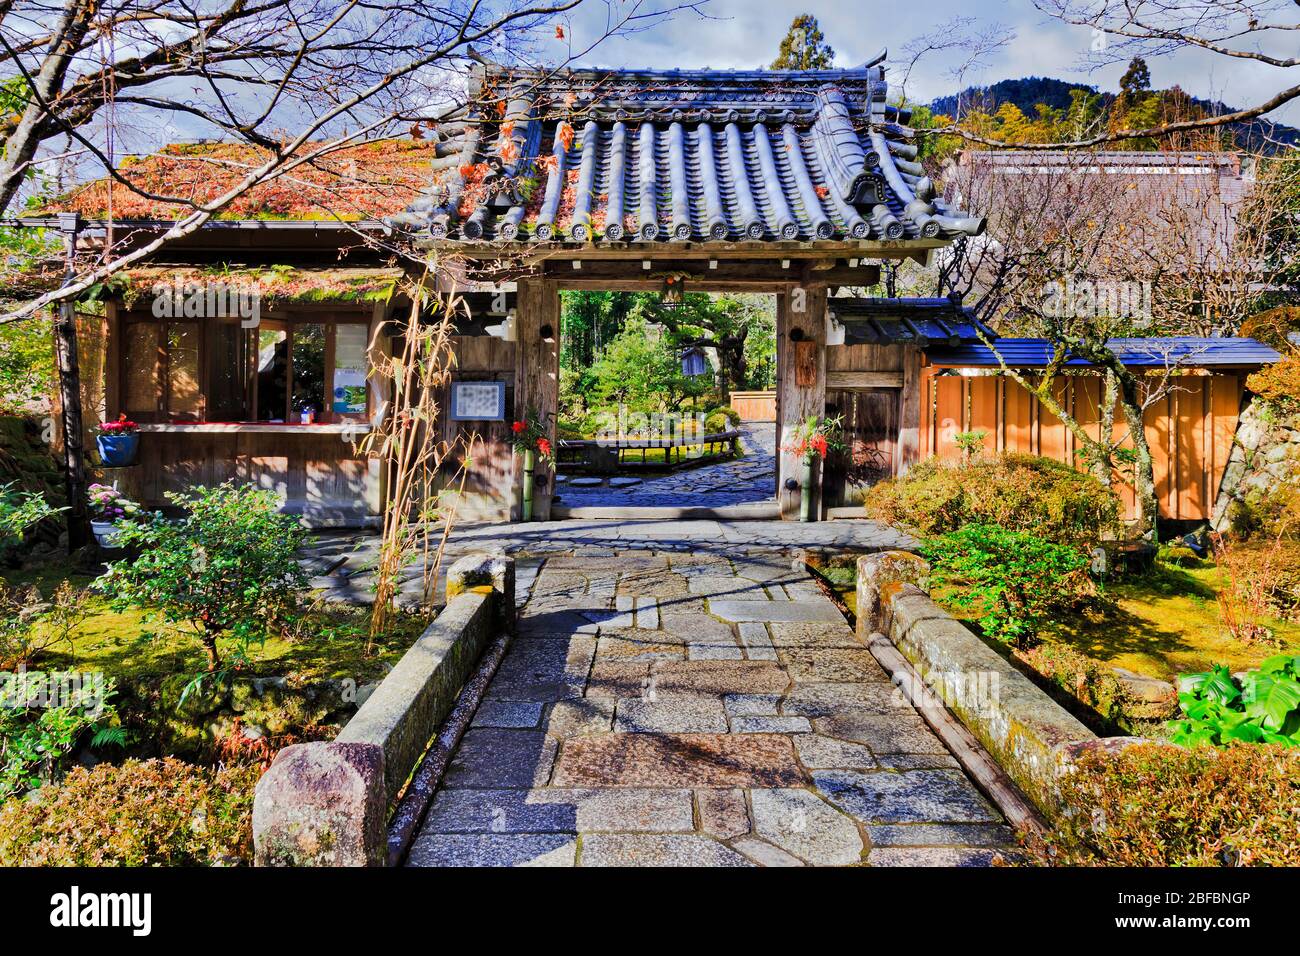 Traditional japanese garden through open historic gate with roof beams and tiles in ancient rural village Ohara near Kyoto. Stock Photo